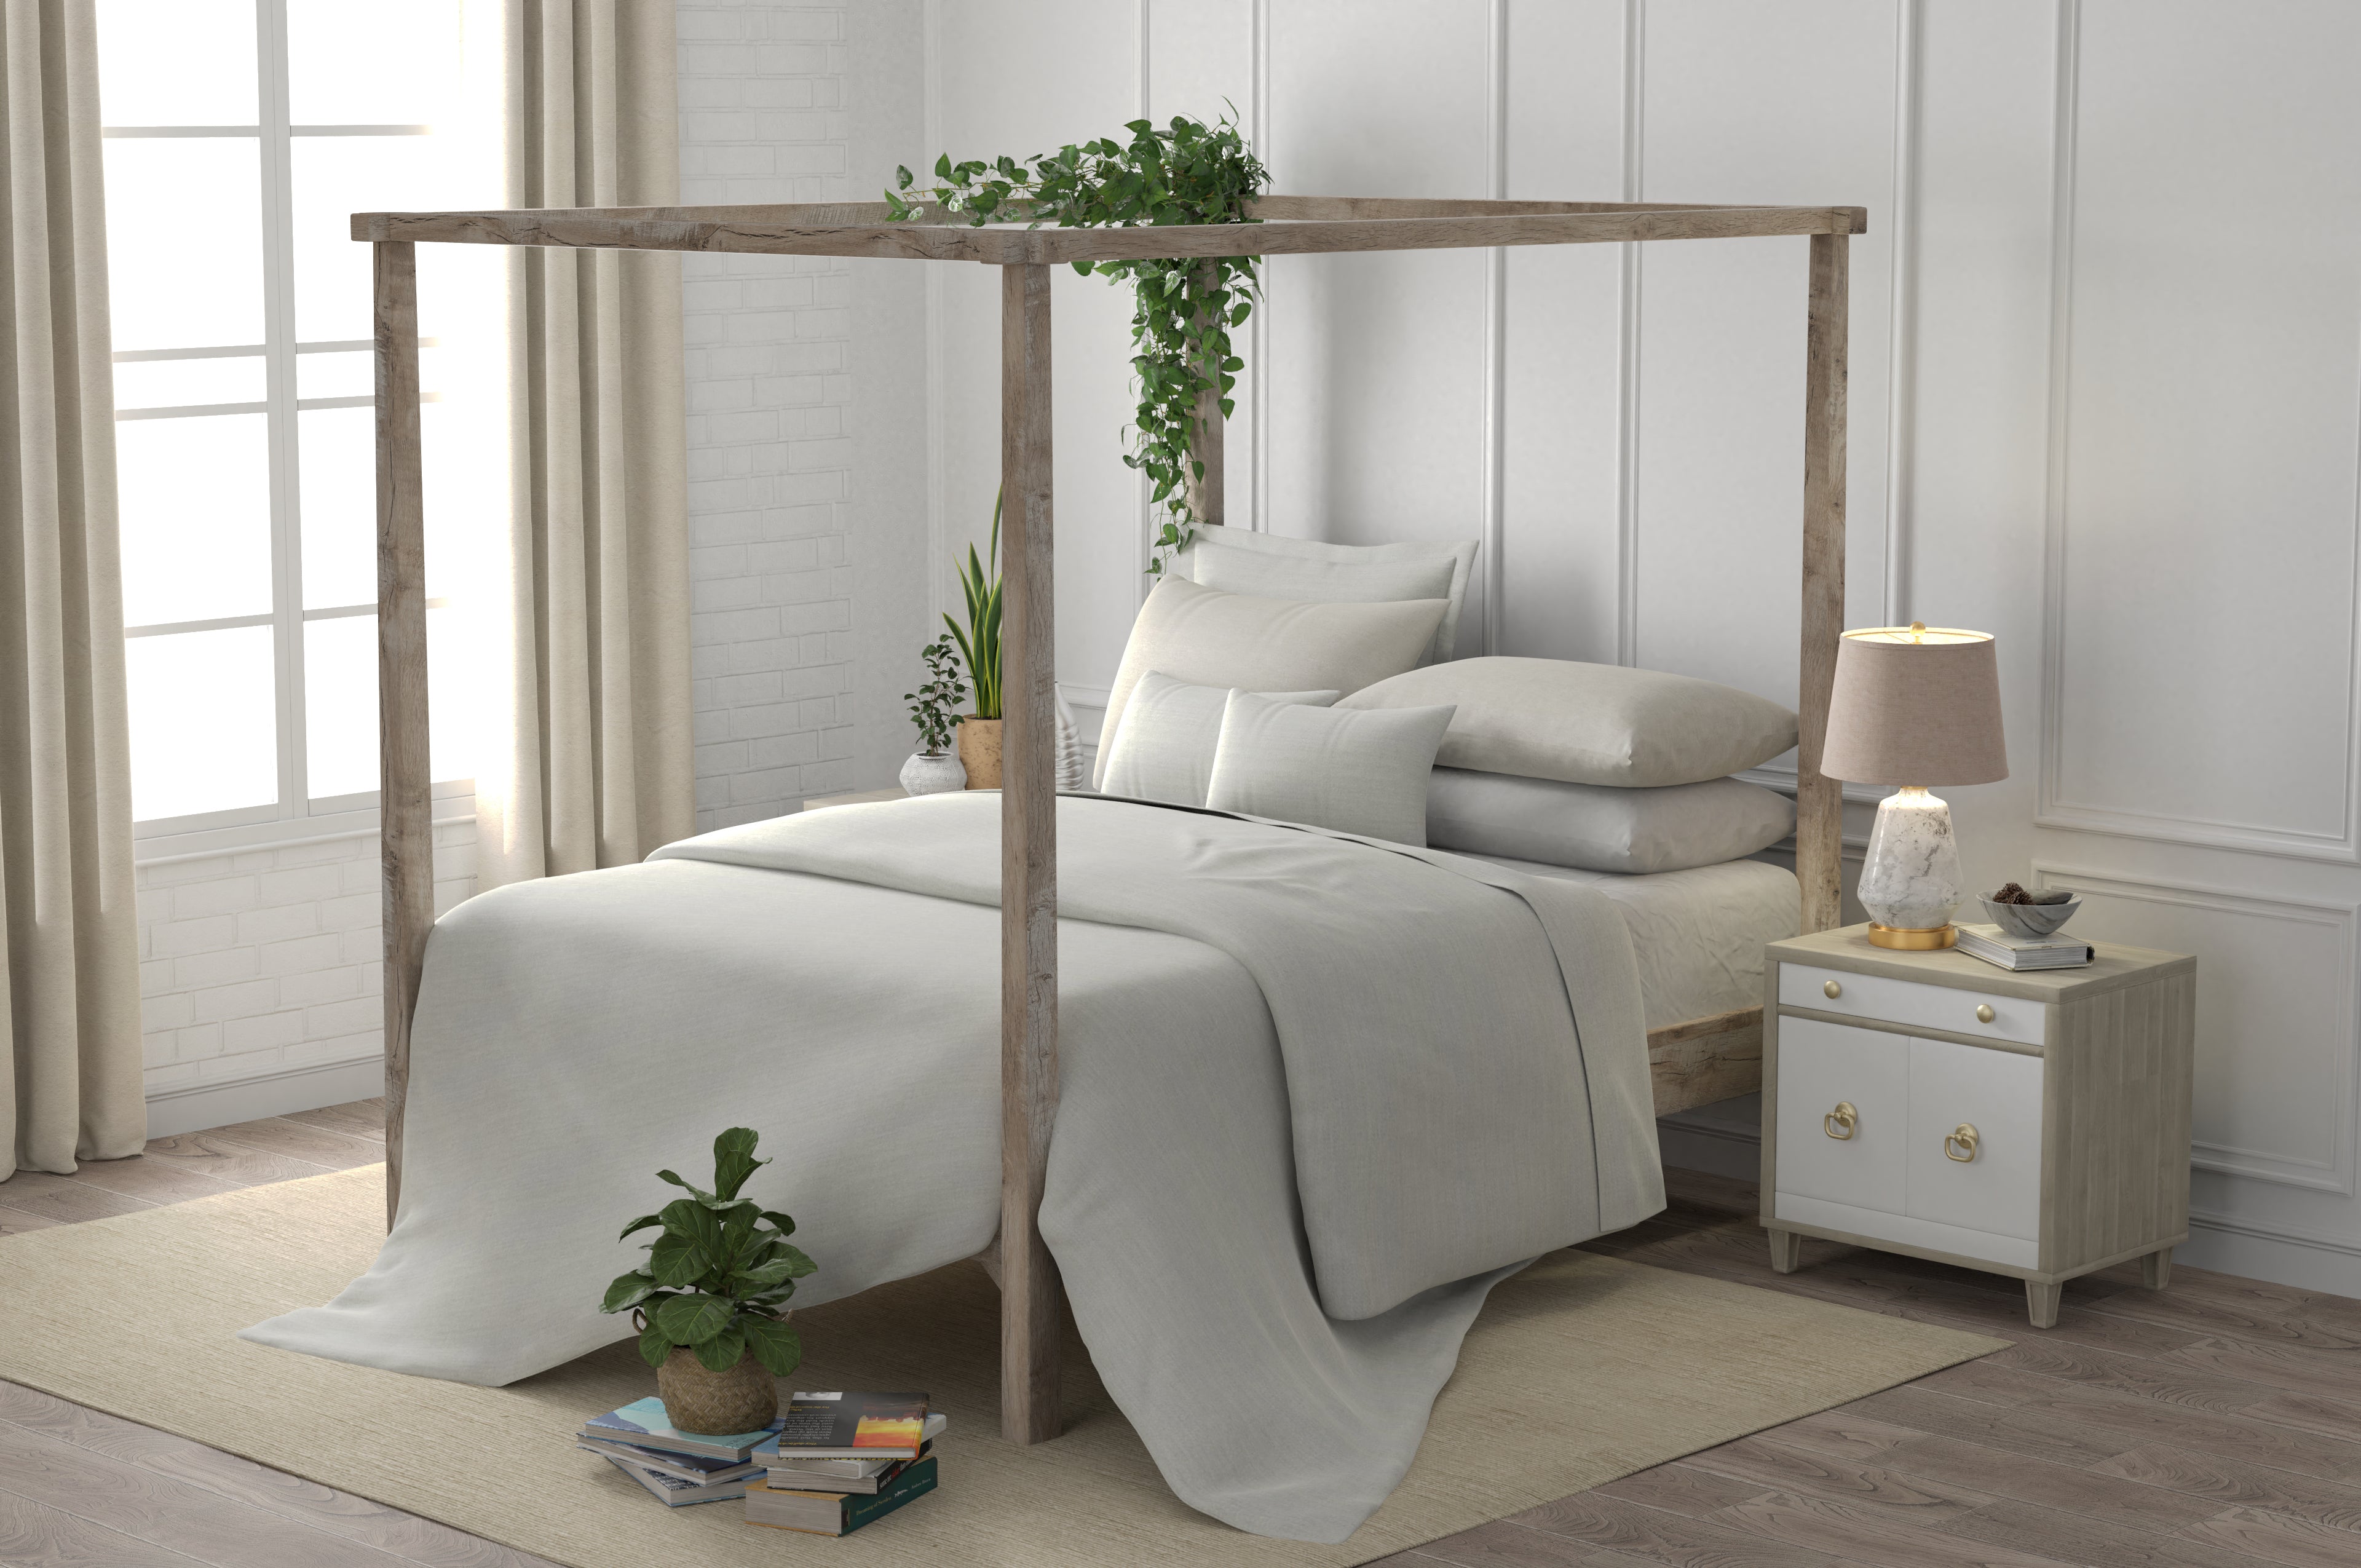 Make Your Bed Like a Hotel: Transform Your Bedroom into a Luxurious Retreat